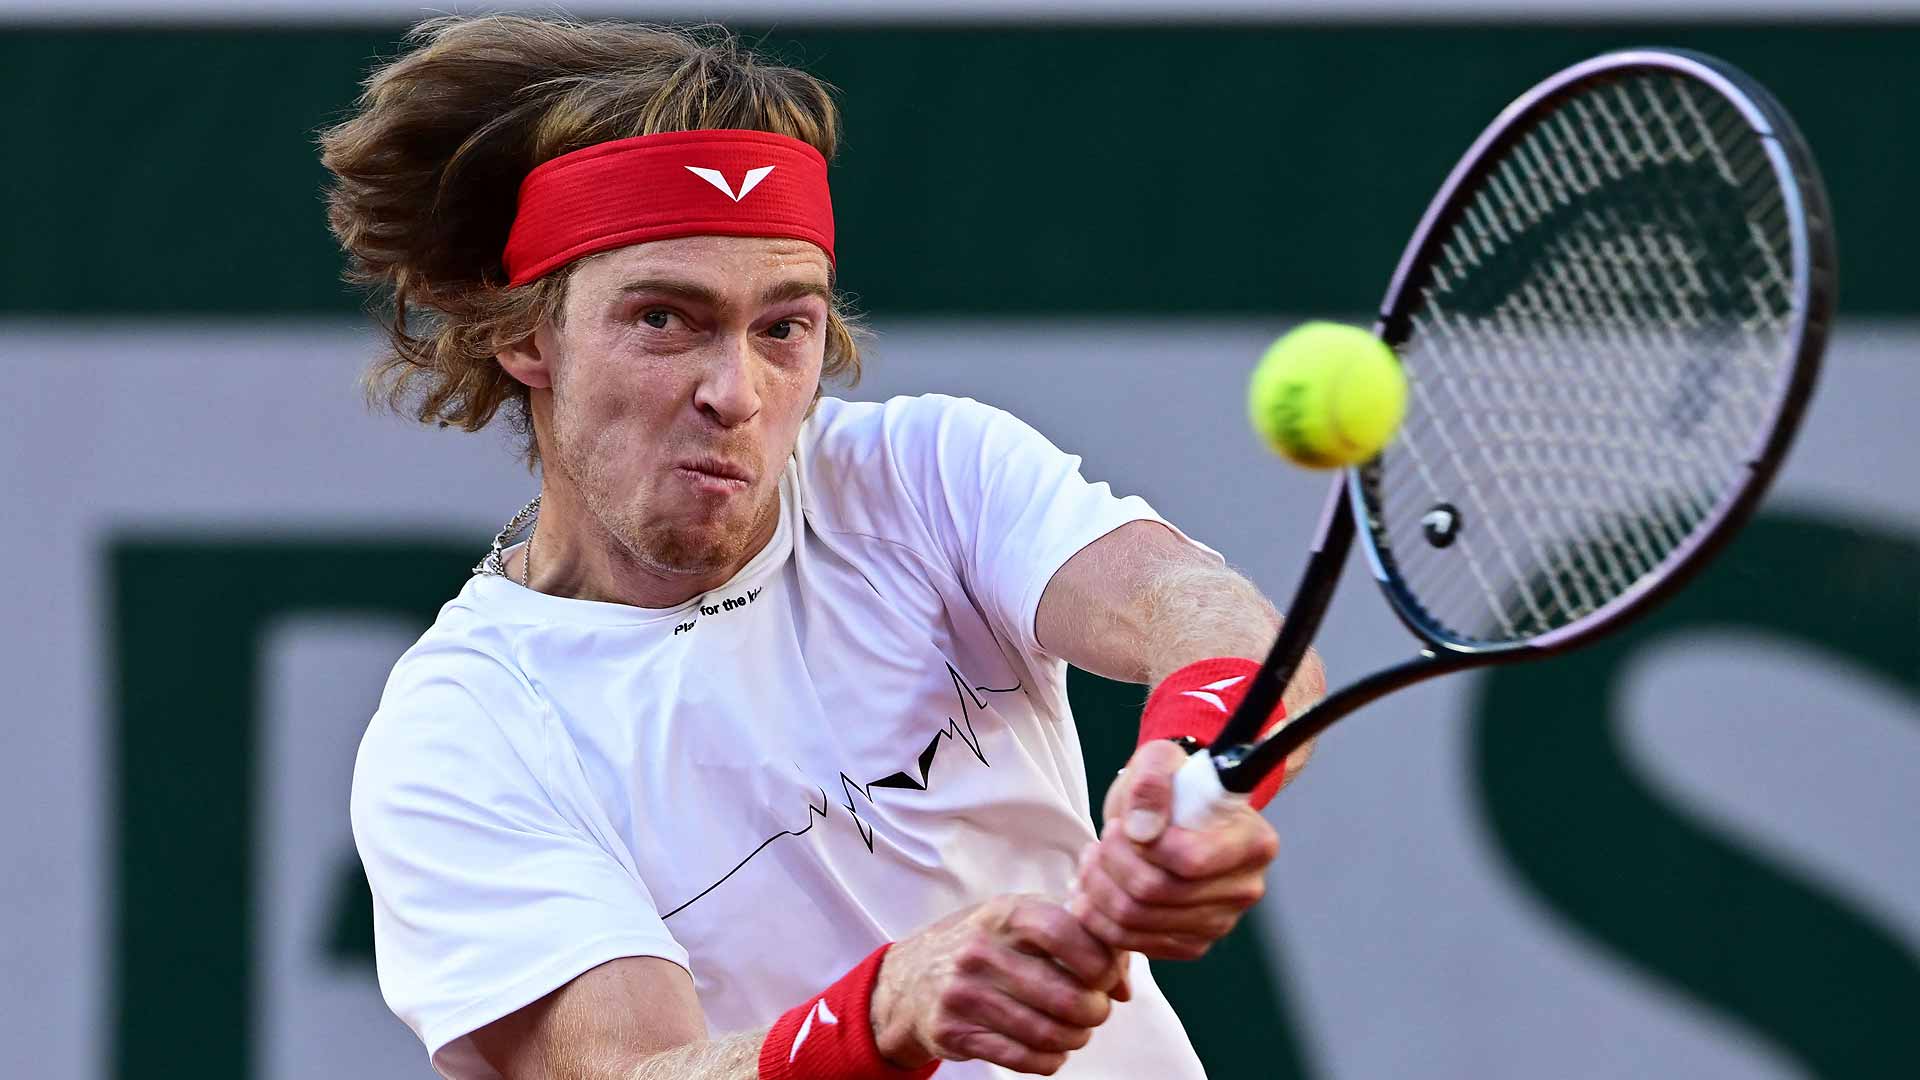 Andrey Rublev defeats Laslo Djere in four sets on Sunday to reach the second round at Roland Garros.